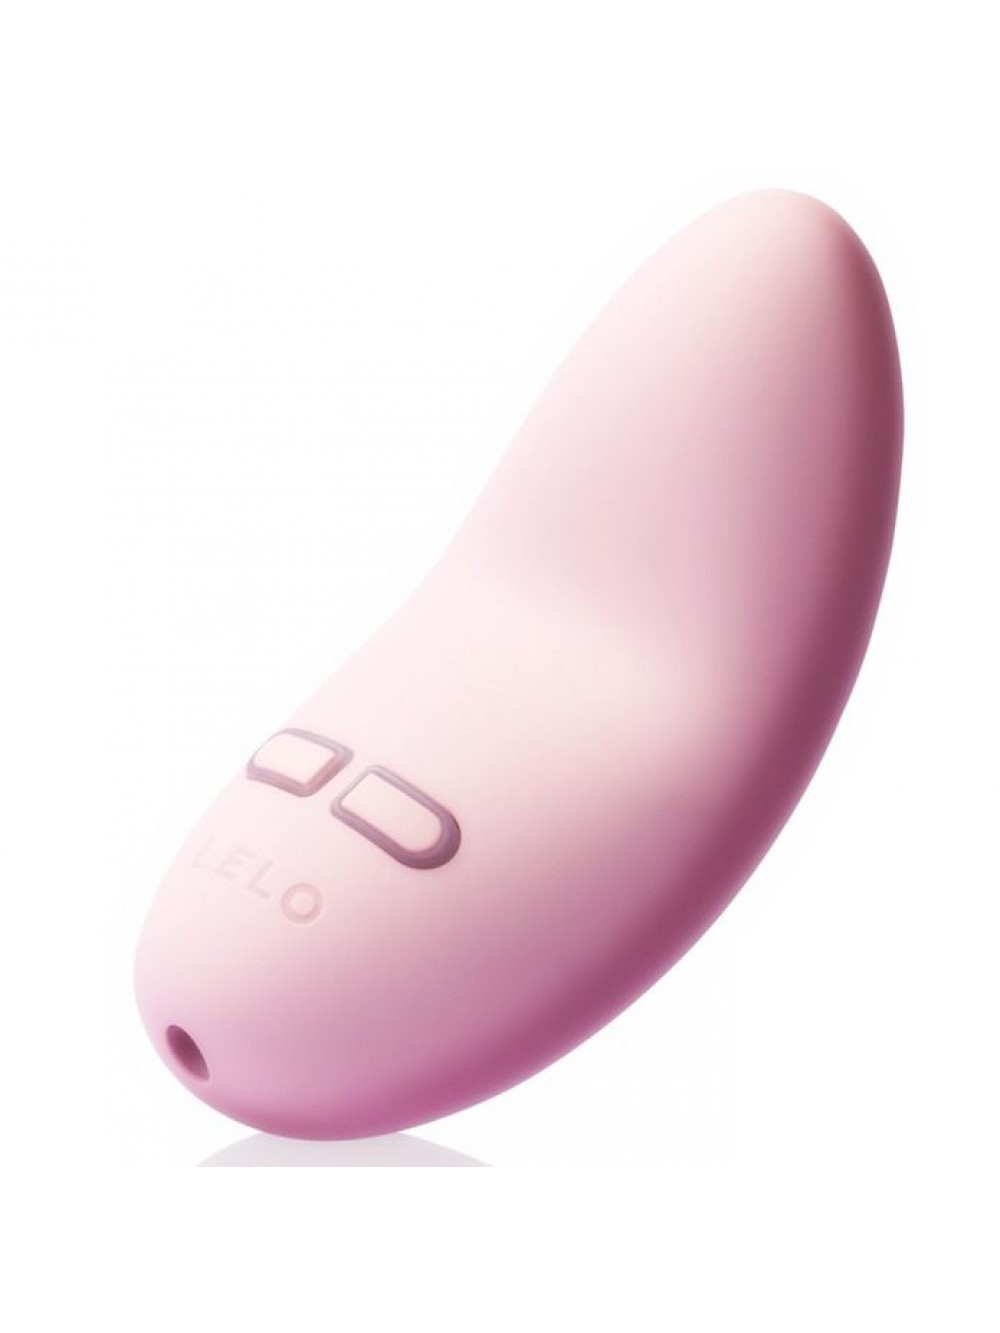 LELO LILY 2 PERSONAL MASSAGER PINK 7350075022791